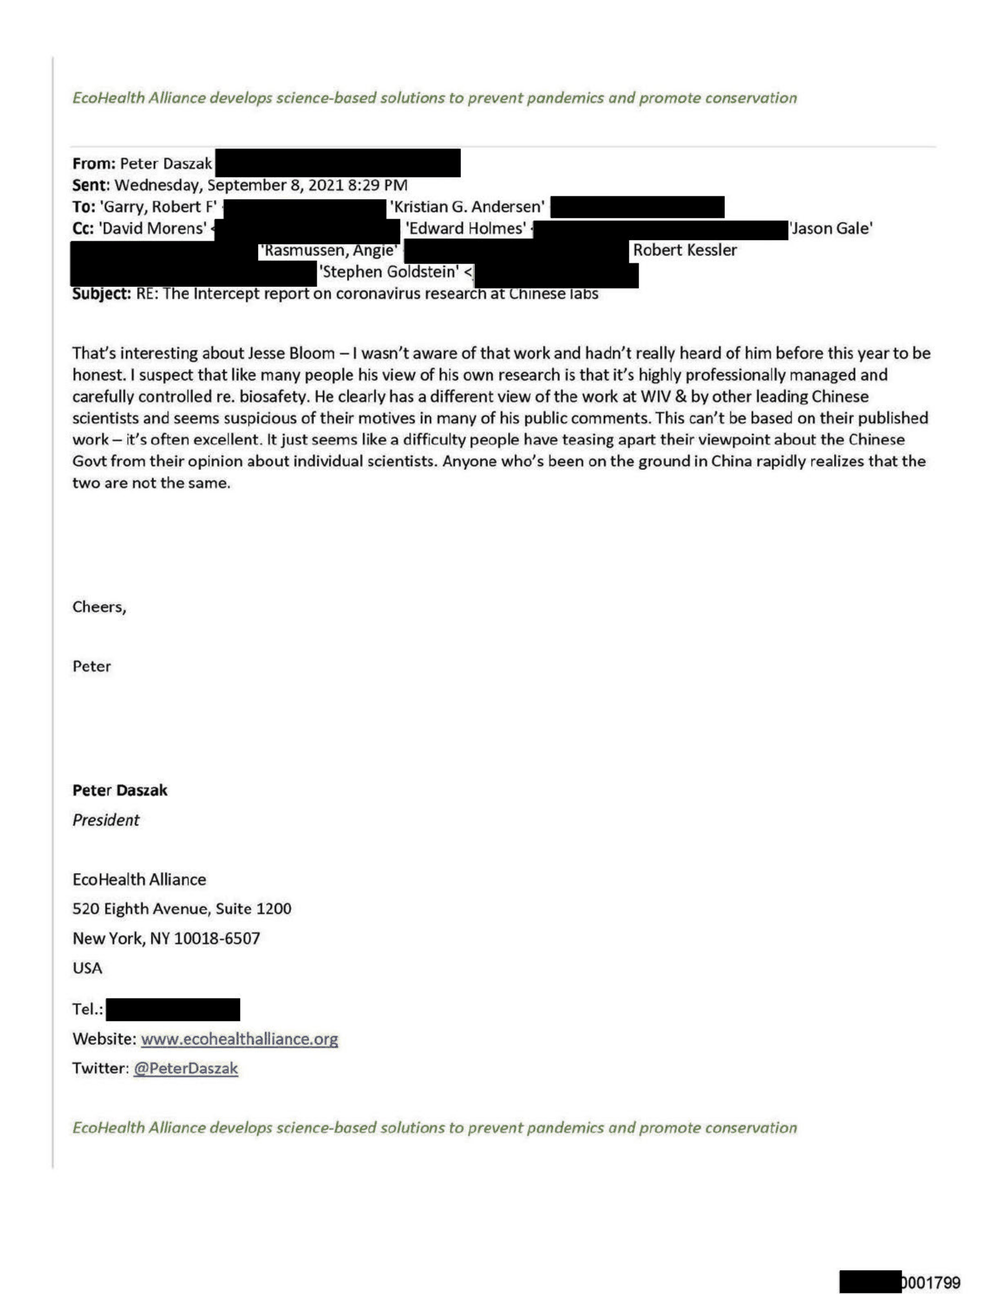 Page 26 from David Morens NIH Emails Redacted